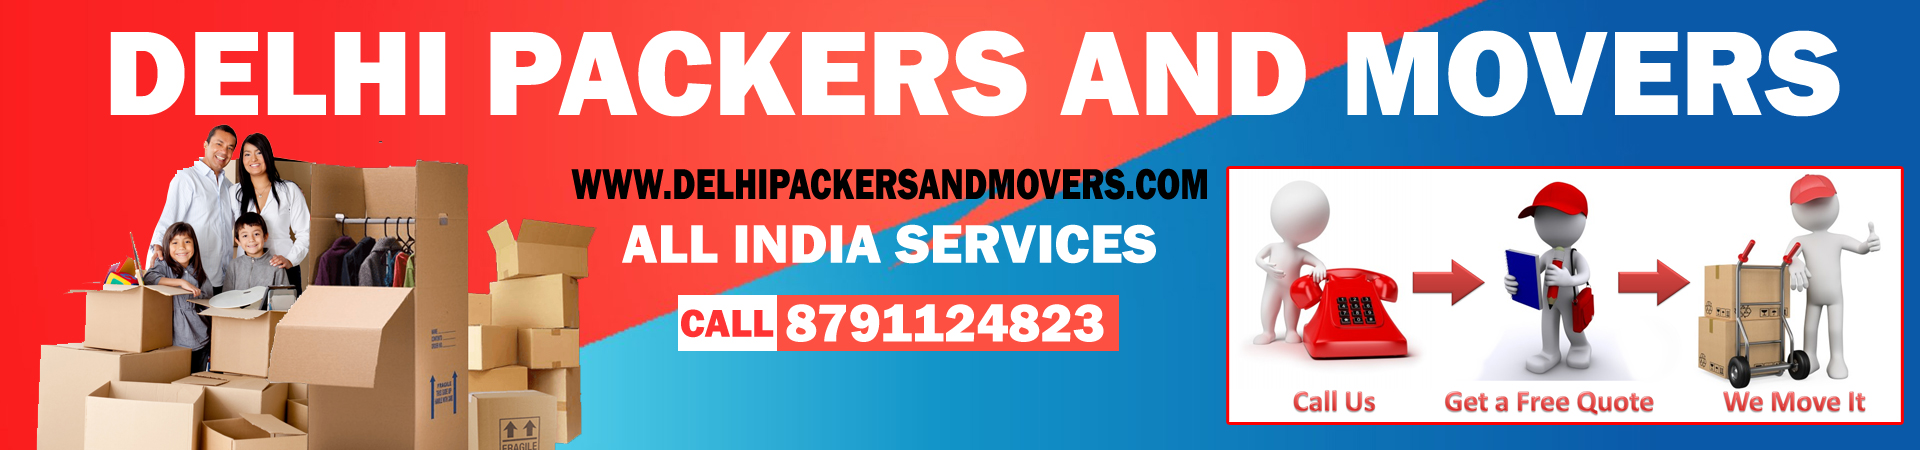 Delhi Packers and Movers Banner